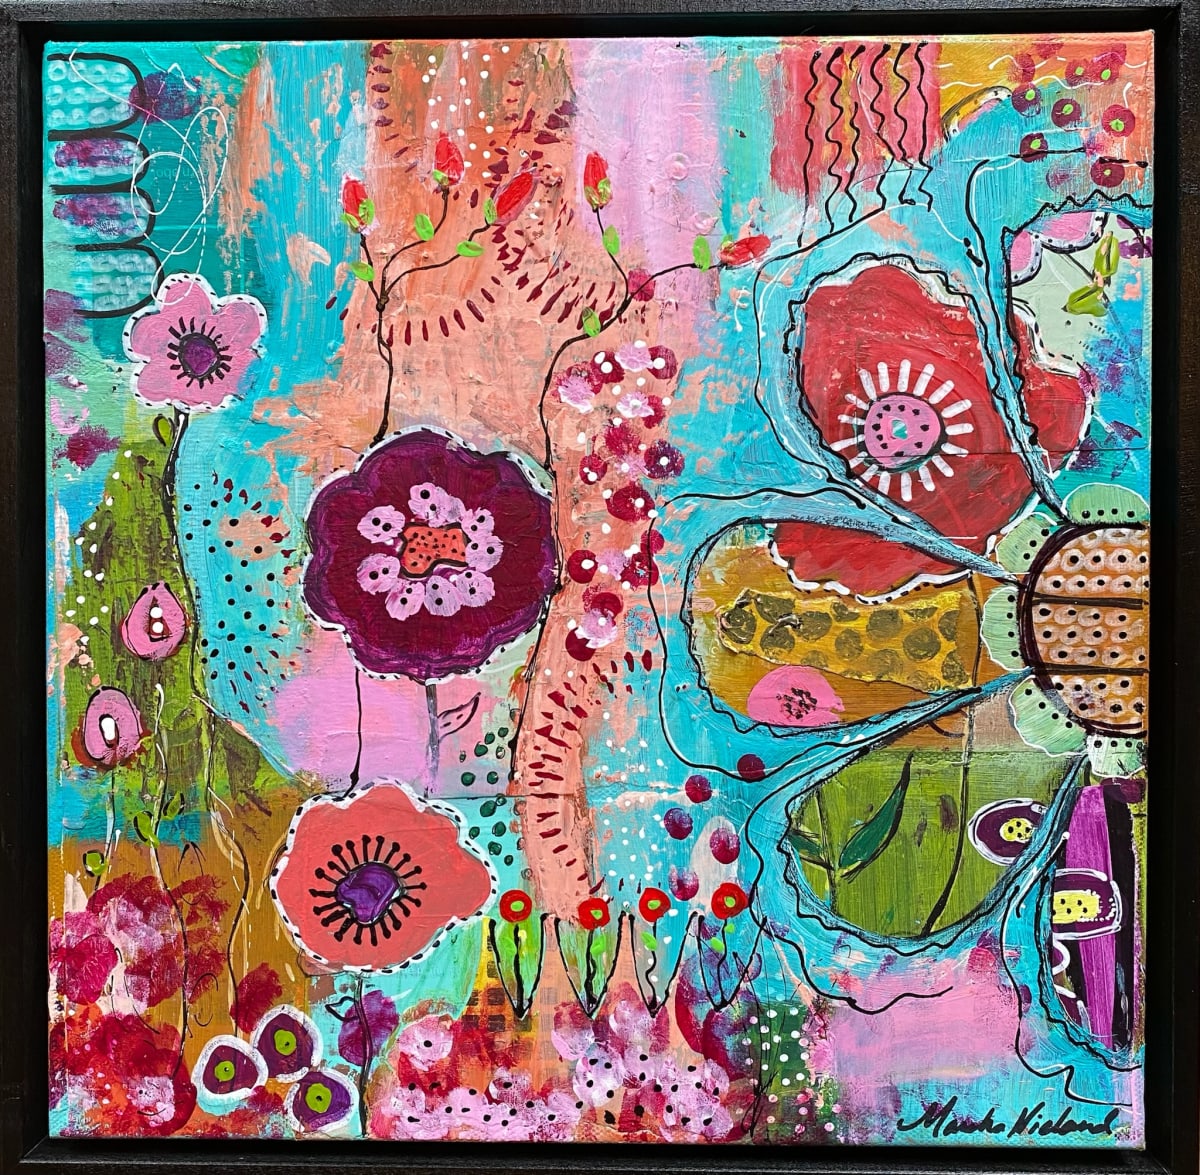 Groovy Wildflower by Marsha Nieland  Image: Acrylic on 12x12 canvas with black floating frame.